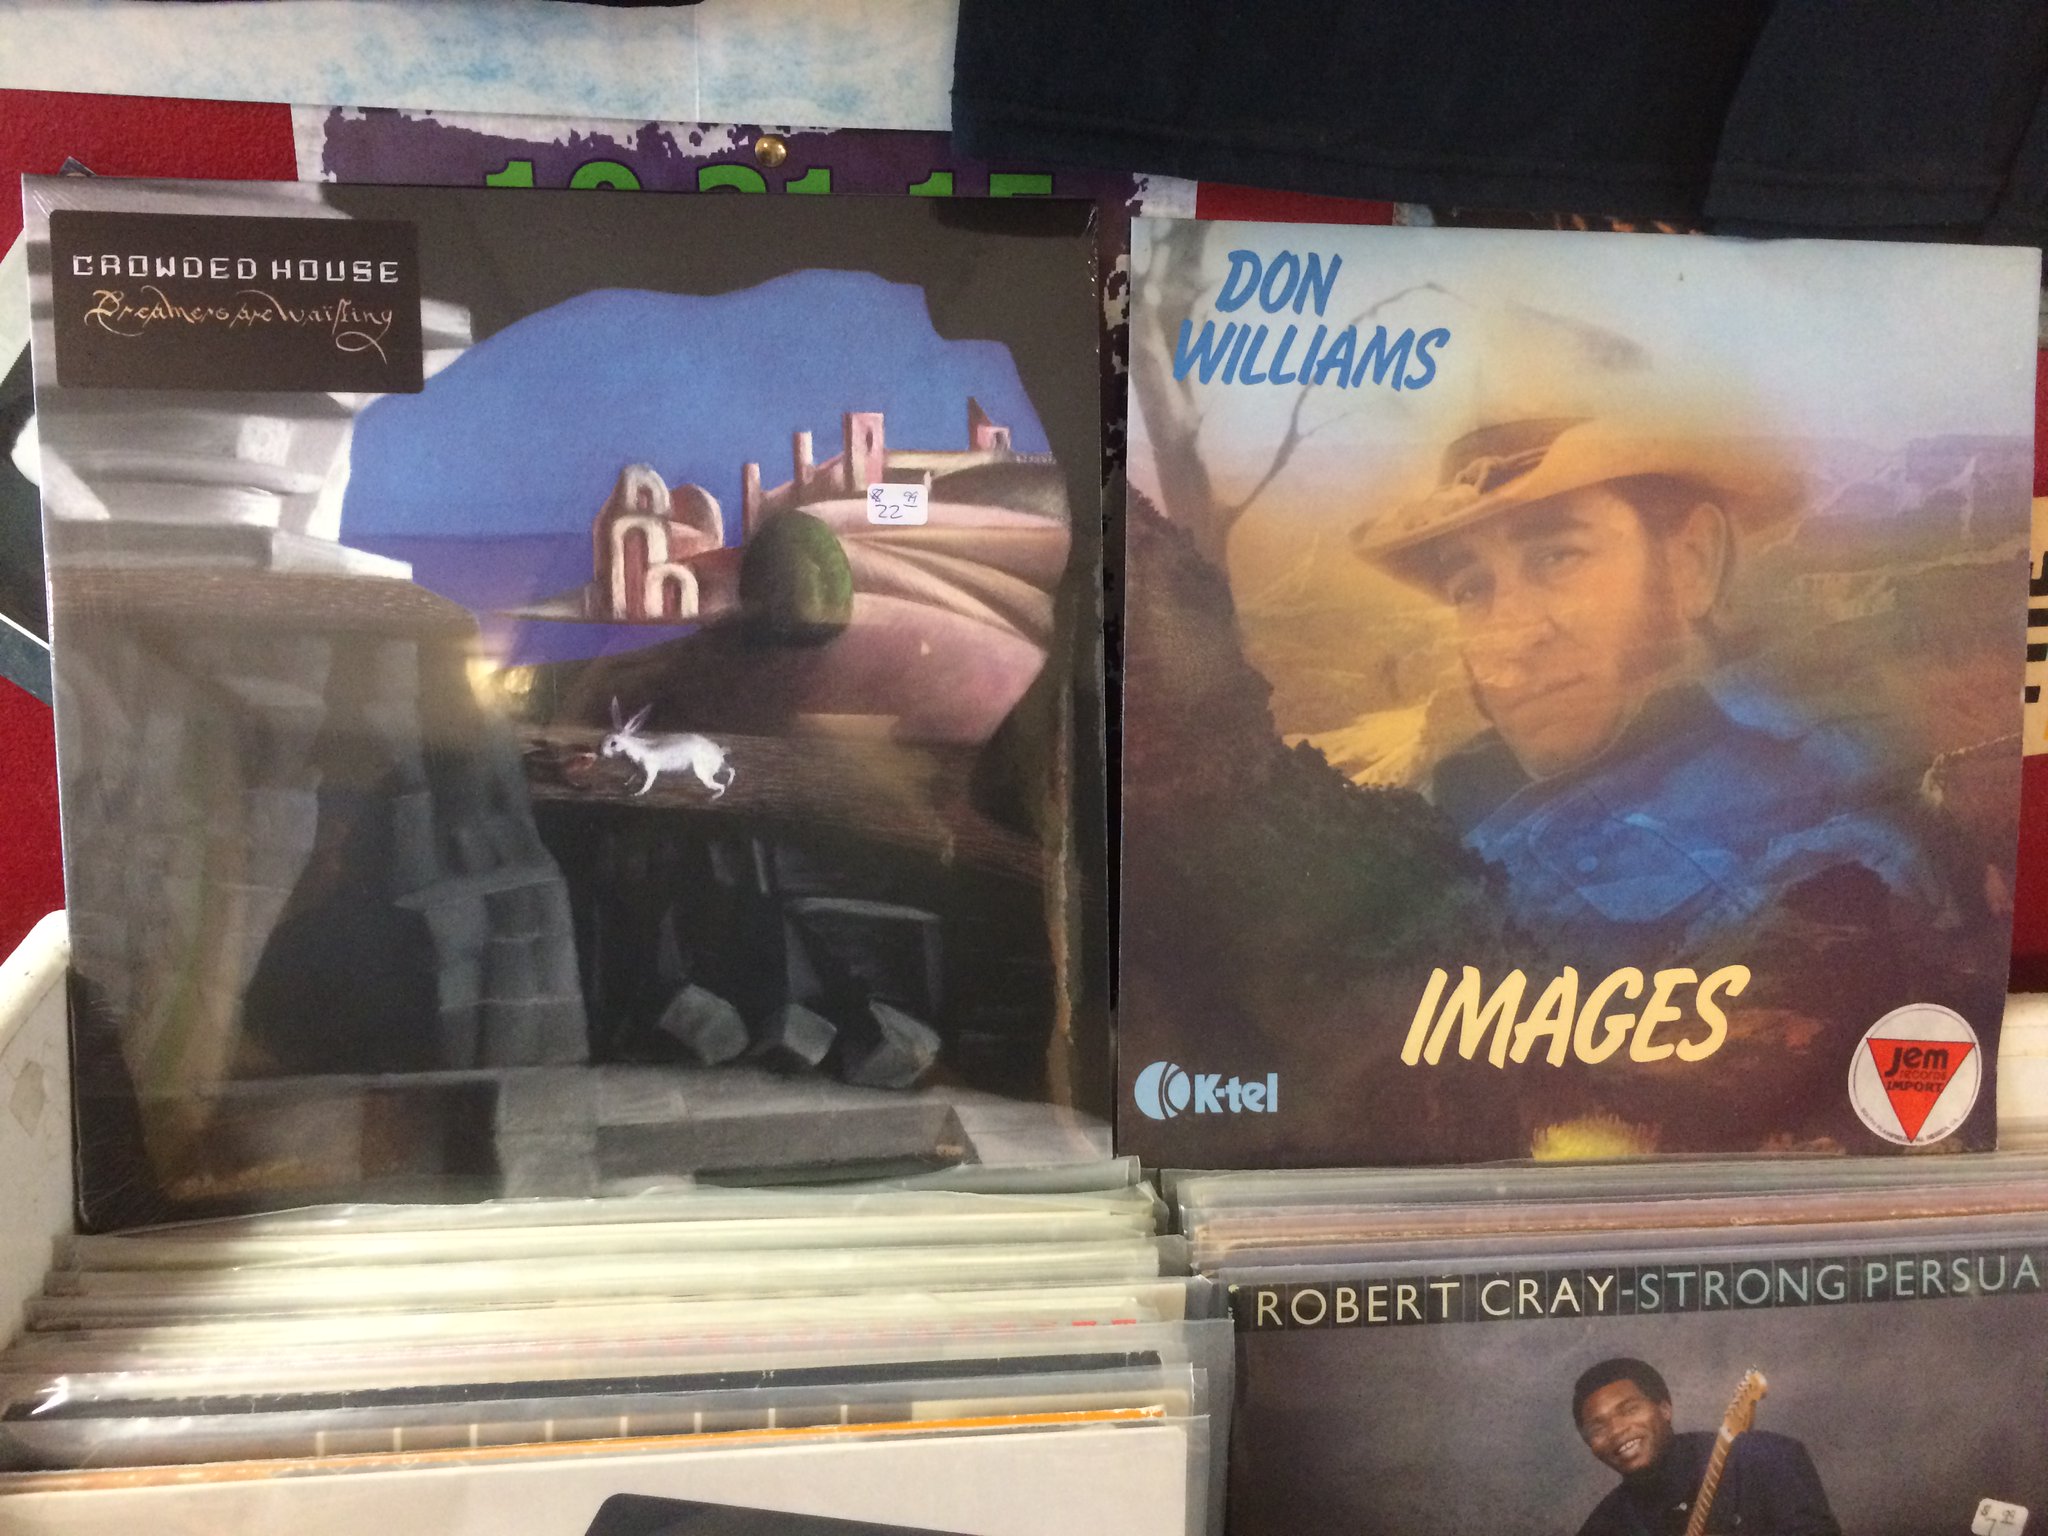 Happy Birthday to Neil Finn of Crowded House & the late Don Williams 